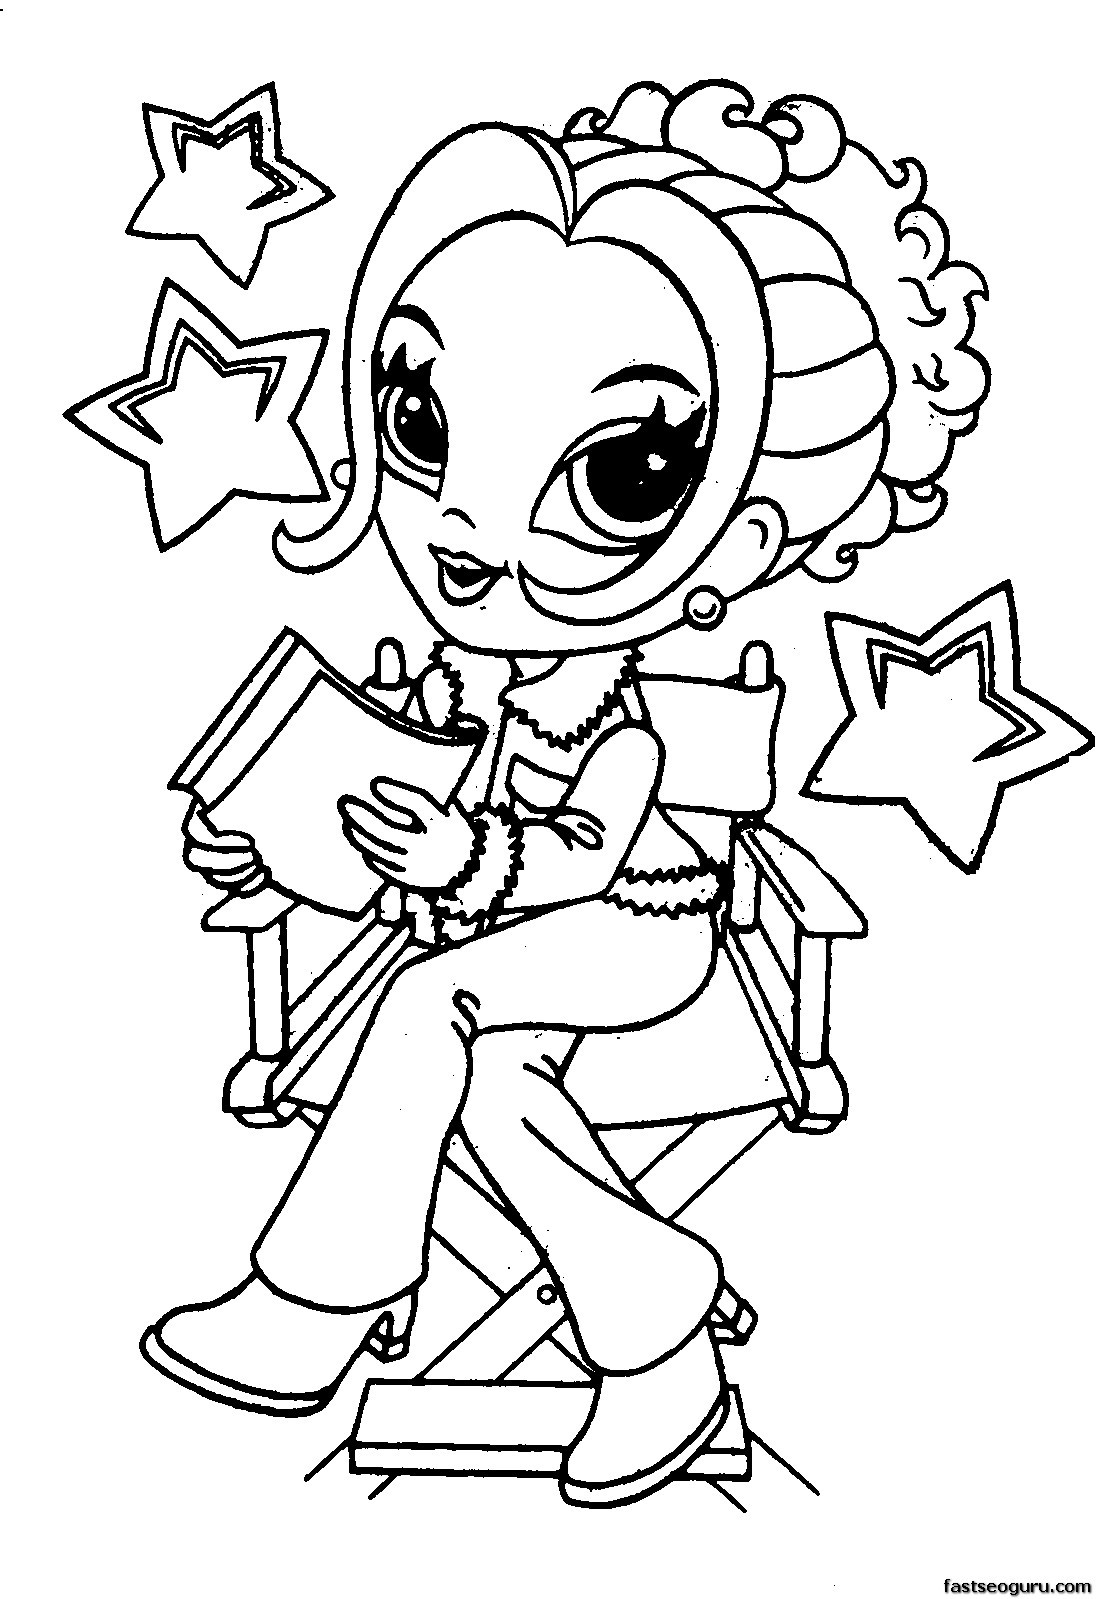 Printable Coloring Pages For Teenage Girls
 coloring pages for girls 10 and up